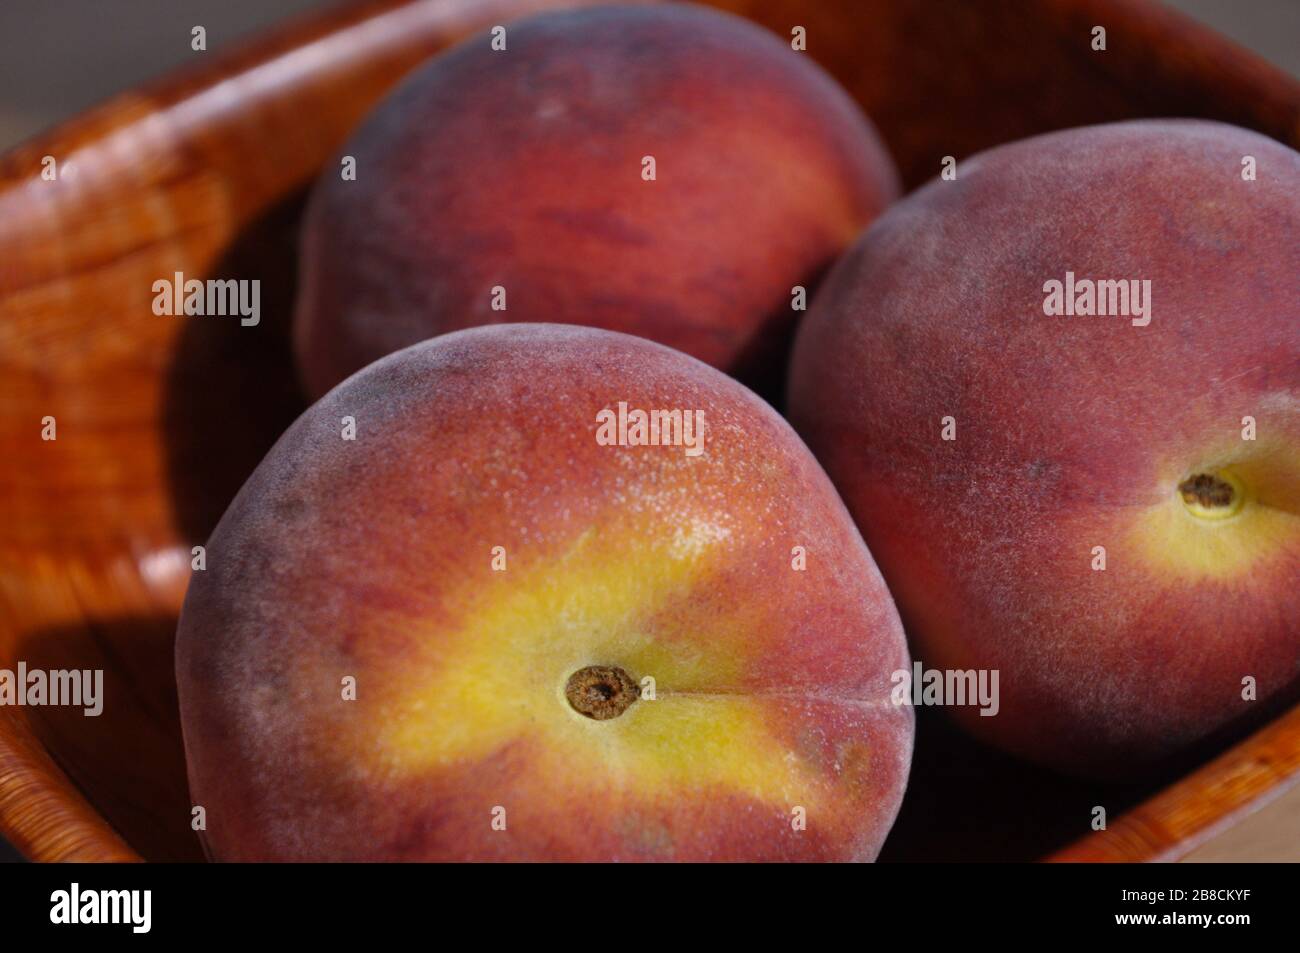 Still life with wooden bowl with three ripe peaches Stock Photo